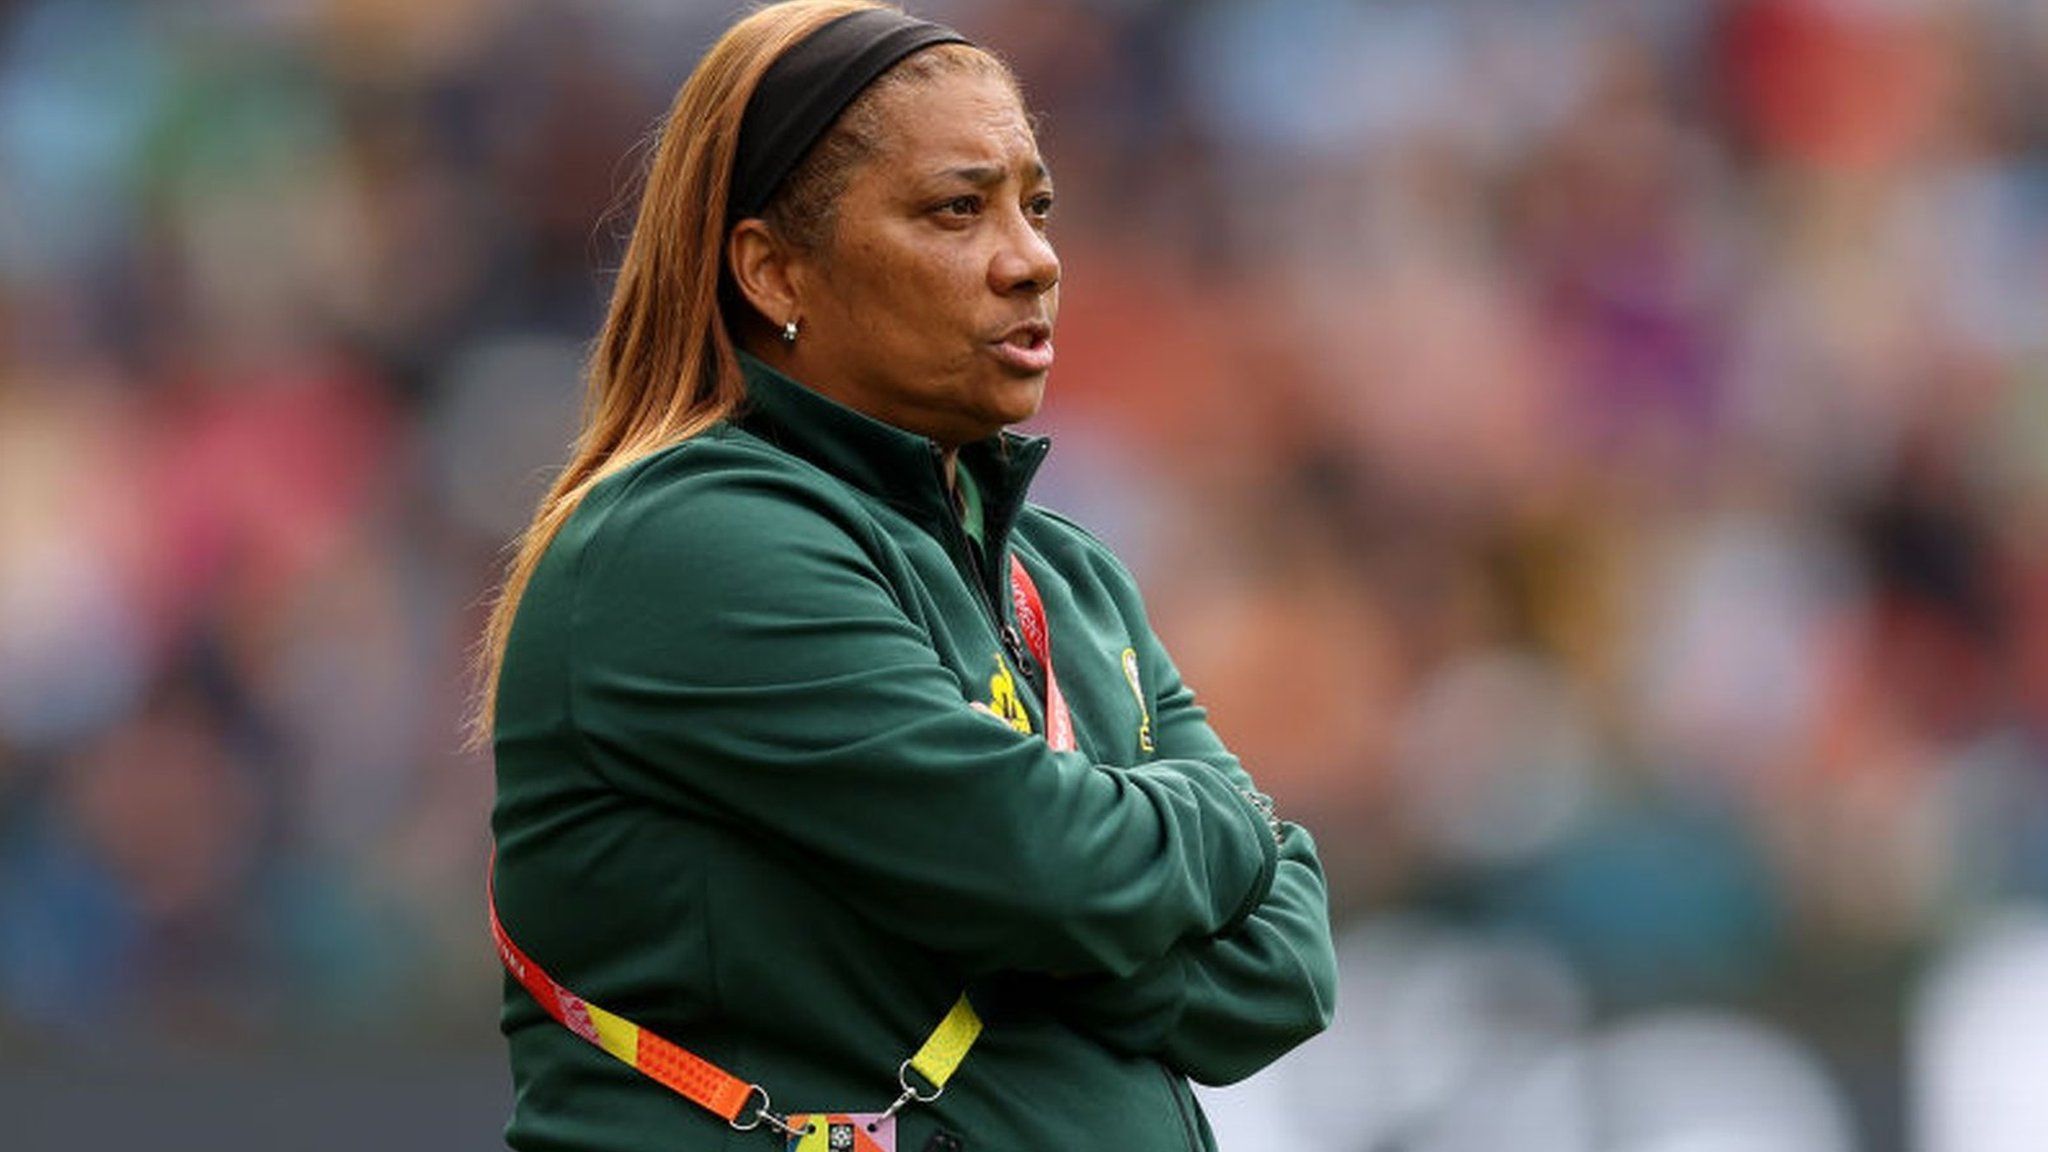 South Africa women's coach Desiree Ellis stands on the sideline during a game